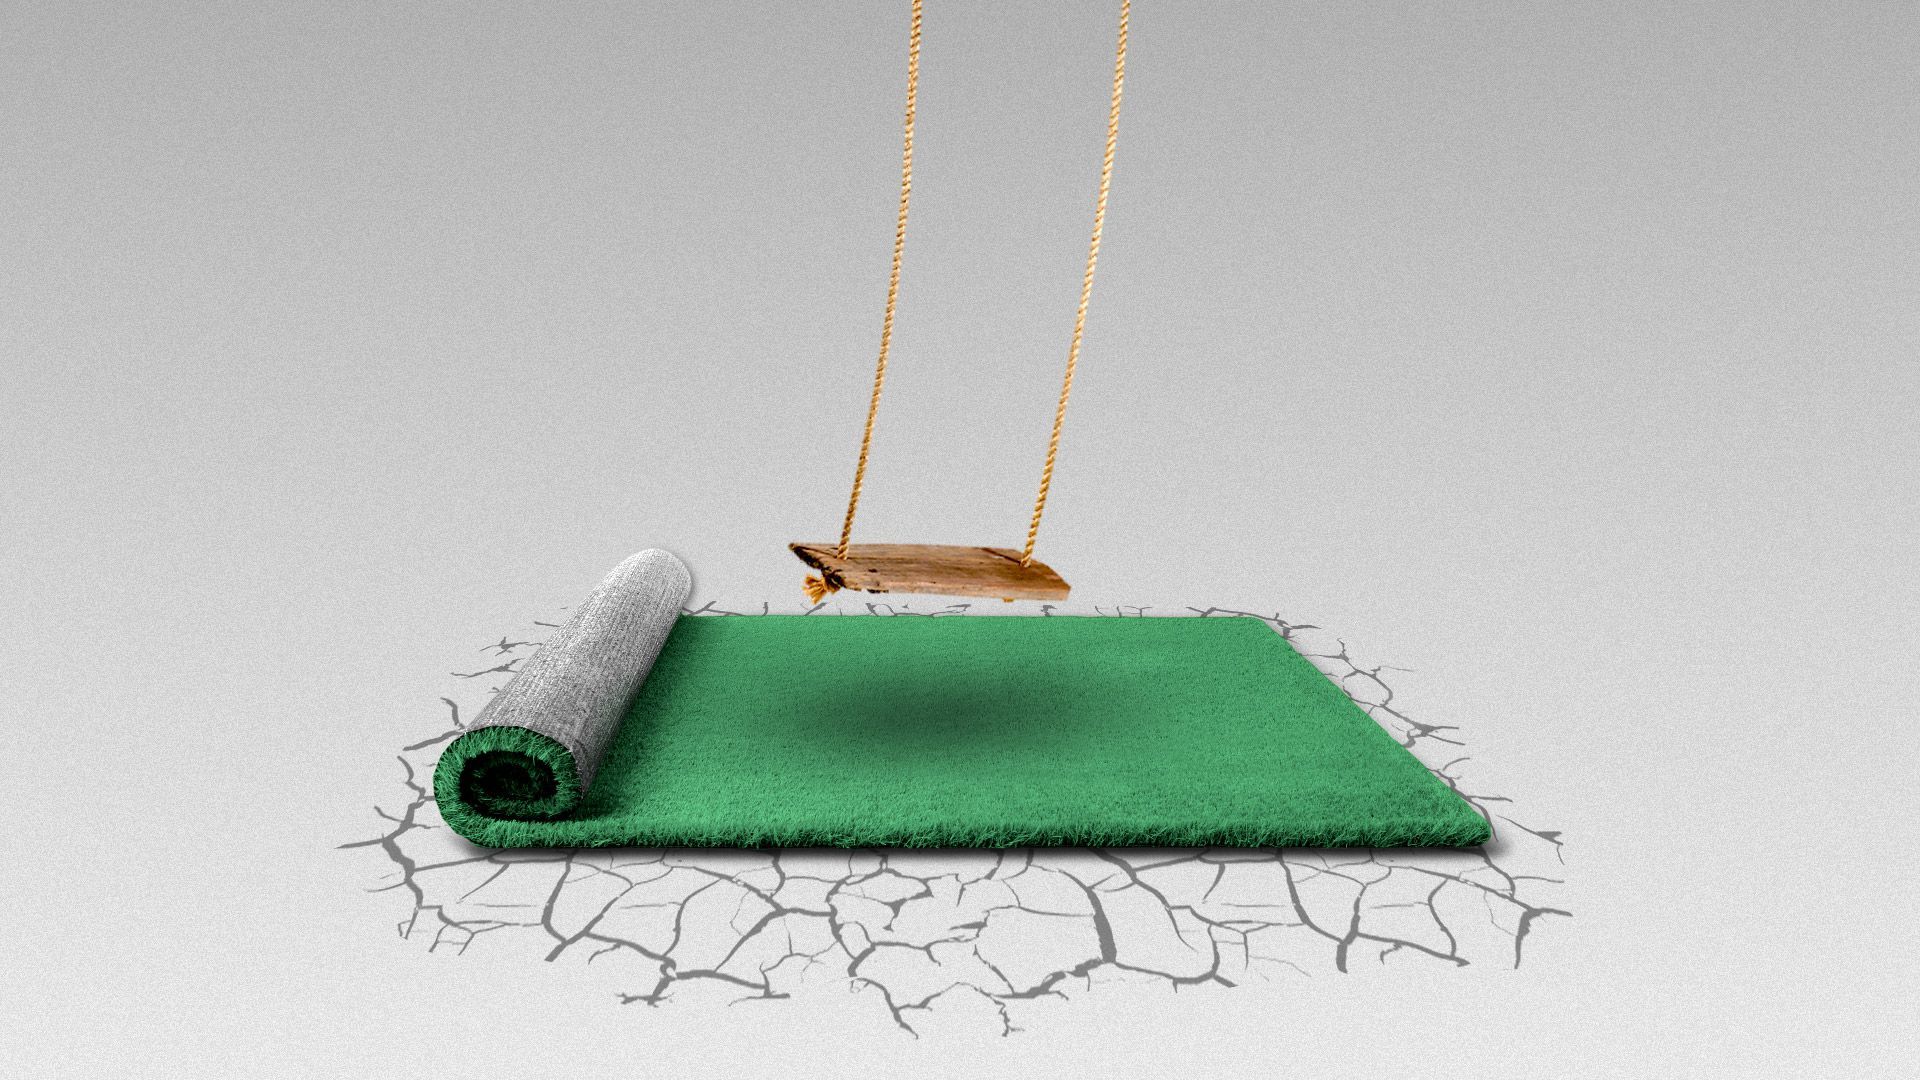 Illustration of a patch of grass on a parched piece of land with a swing above